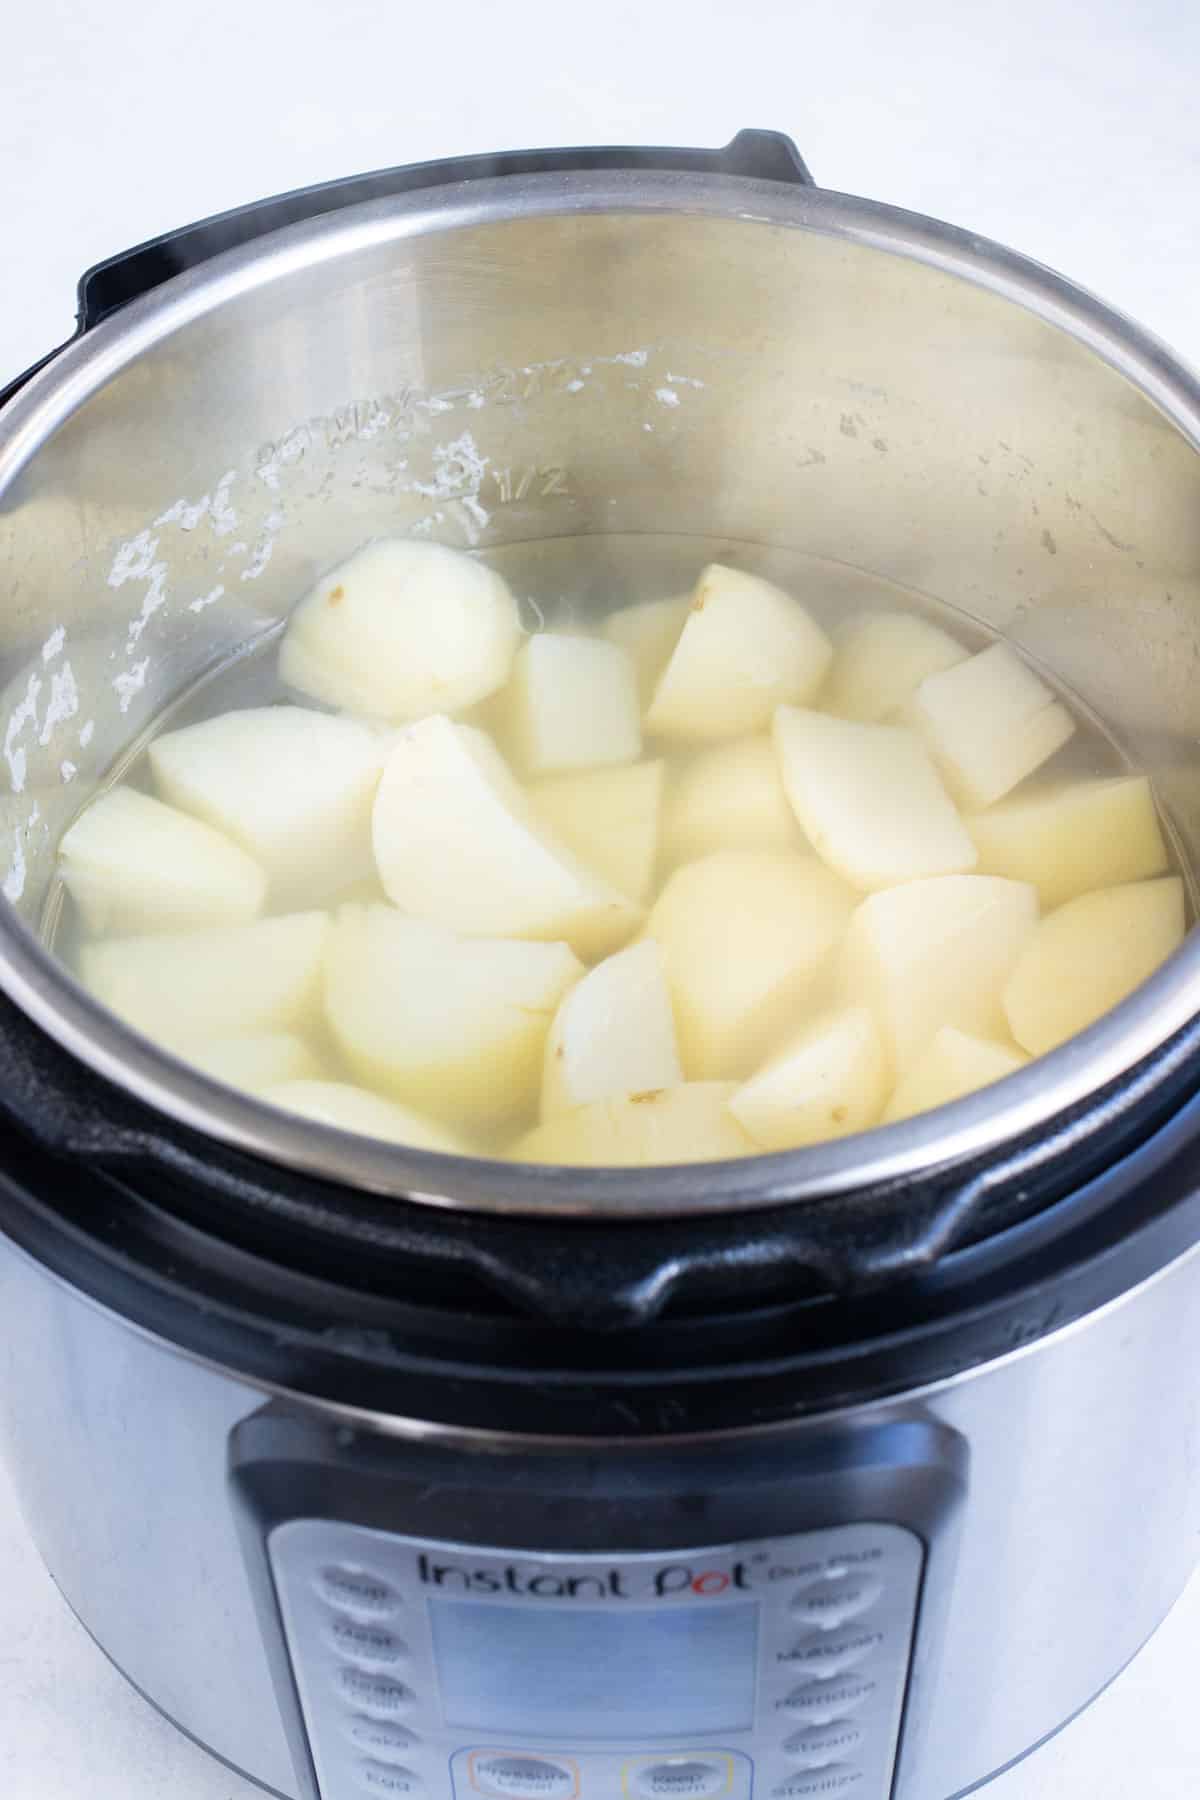 Potatoes are fork-tender after cooking.